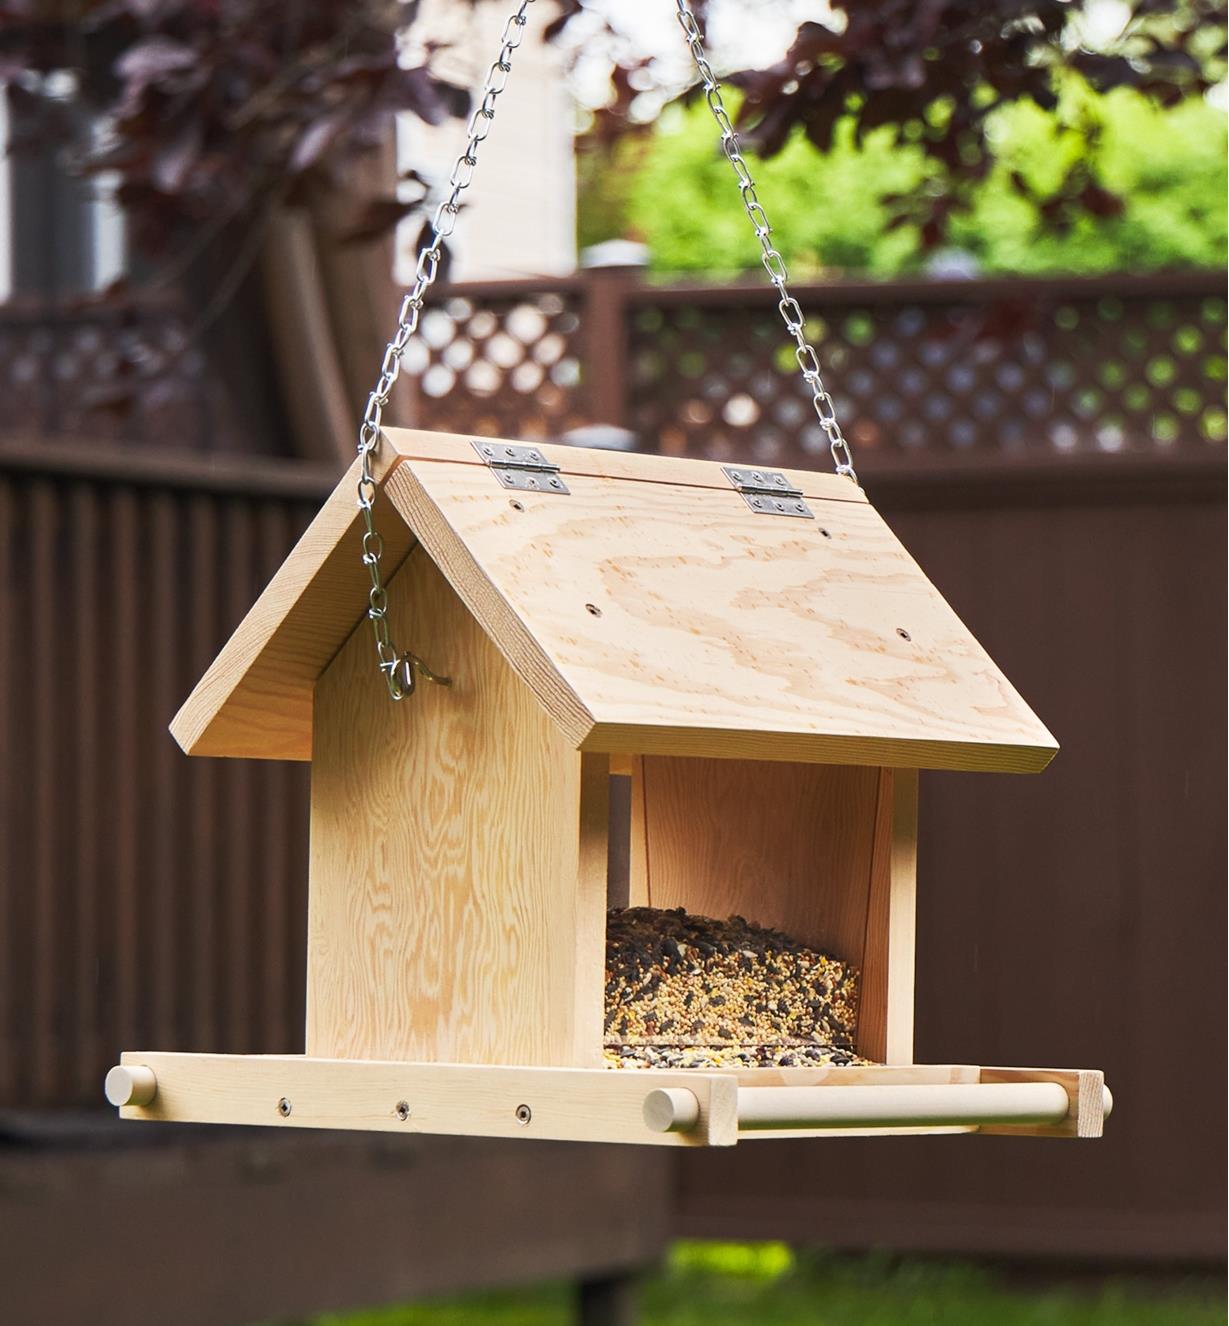 Example of a completed bird feeder